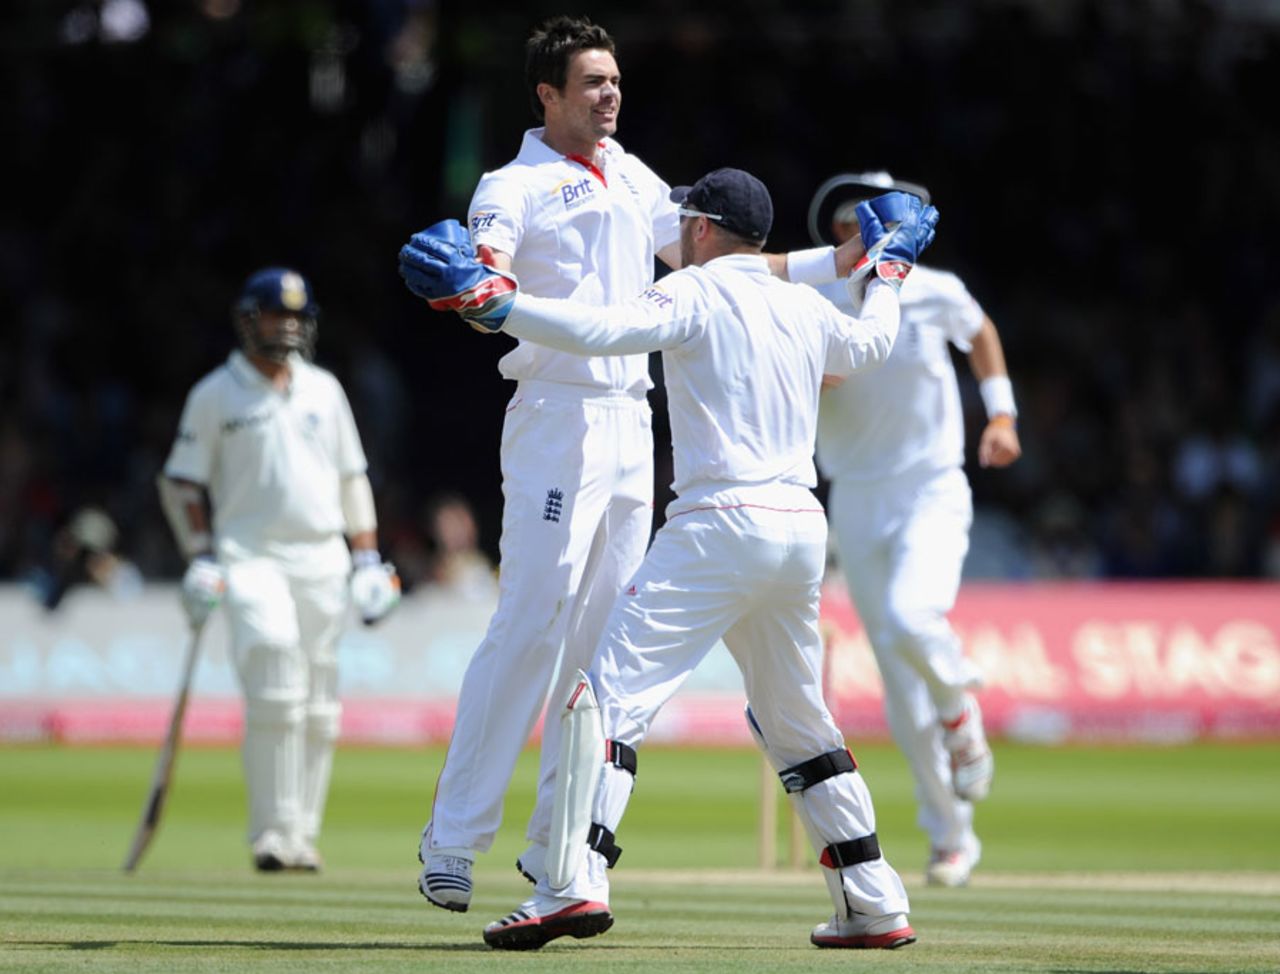 James Anderson is congratulated on dismissing VVS Laxman, England v India, 1st Test, Lord's, 5th day, July 25, 2011